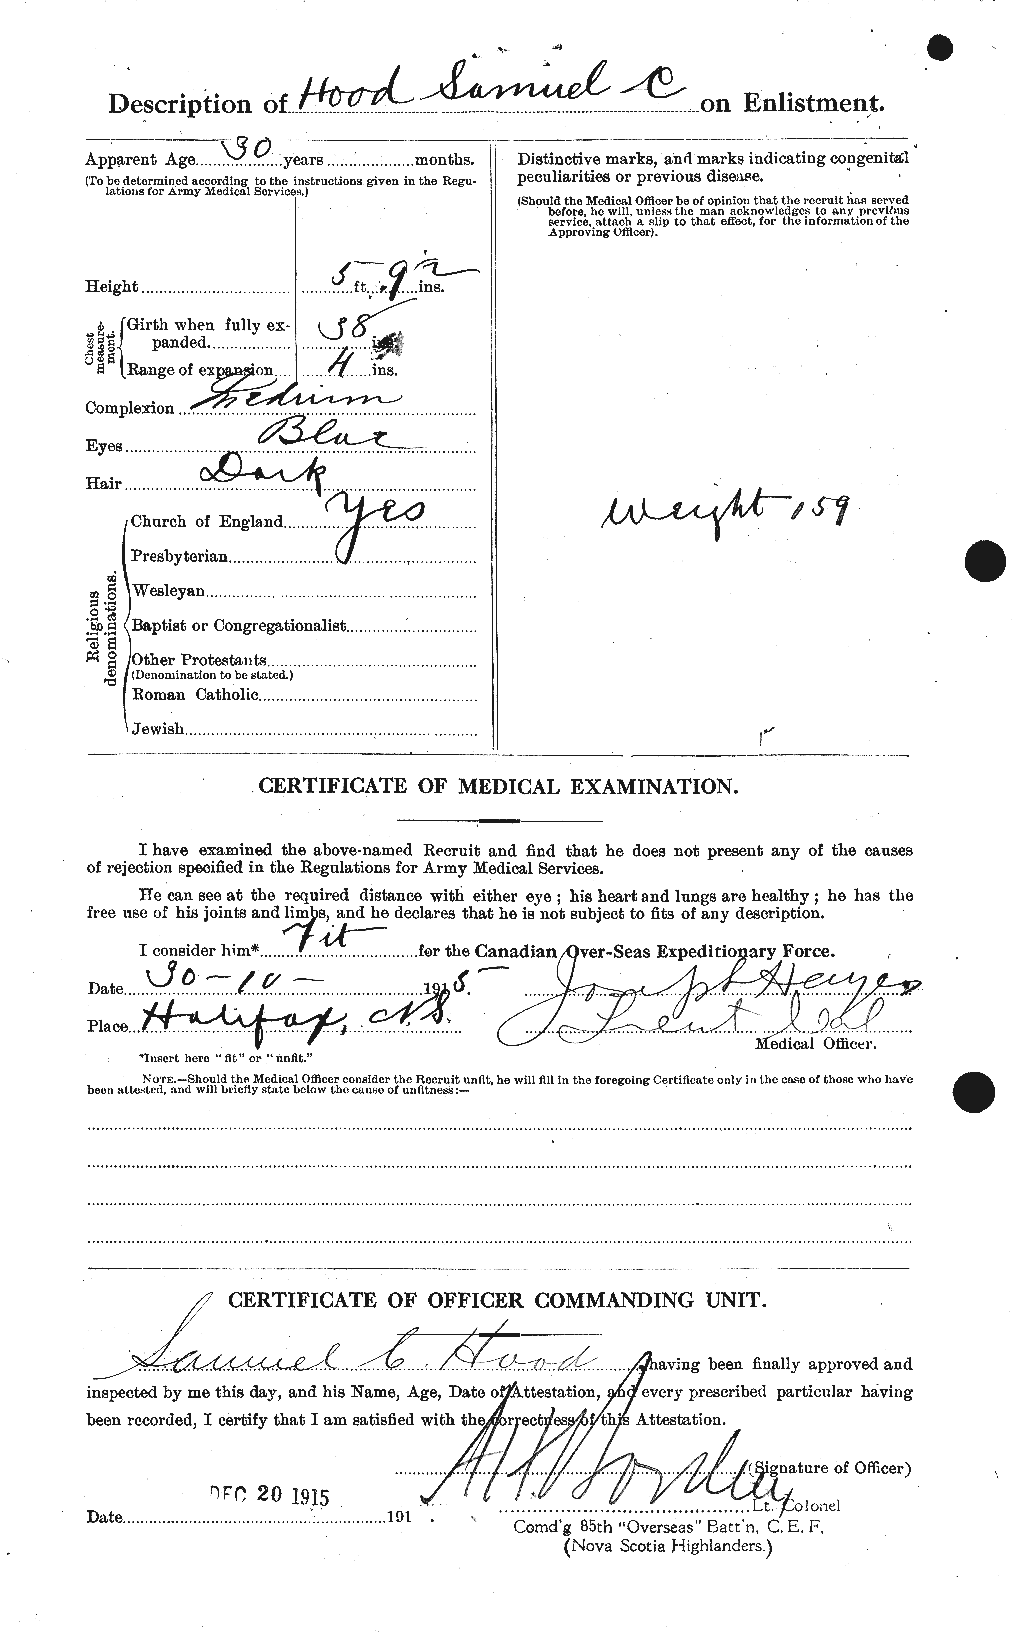 Personnel Records of the First World War - CEF 409379b